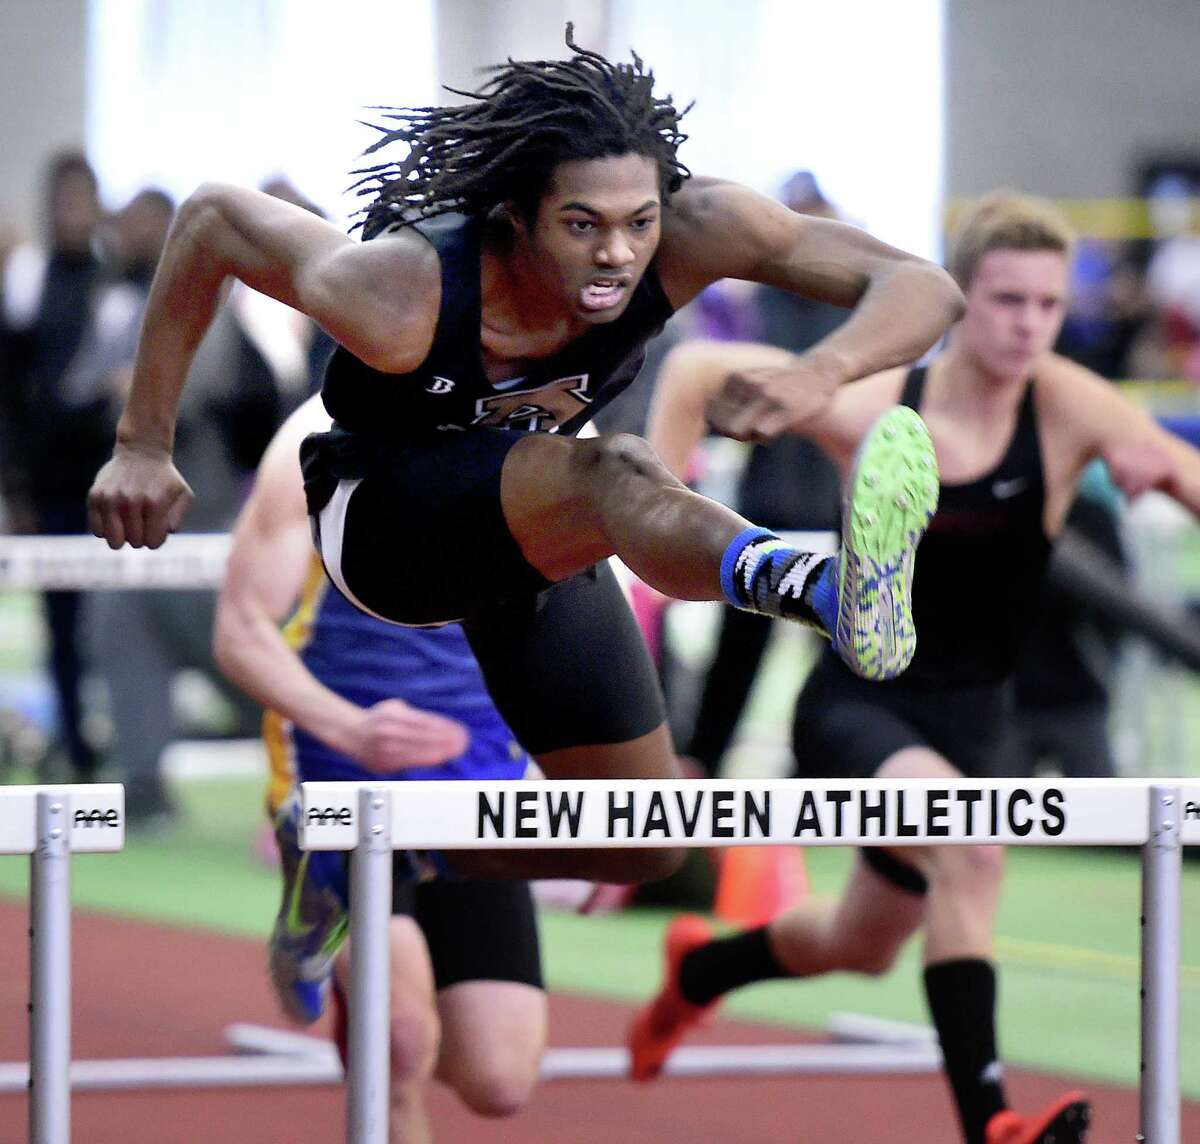 Aaron Rattley of Amity clears the last hurdle to place first in the 55 meter hurdles at the CIAC Class LL Indoor Track & Field Championship at the Floyd Little Athletic Center. Photo by Arnold Gold/New Haven Register agold@newhavenregister.com